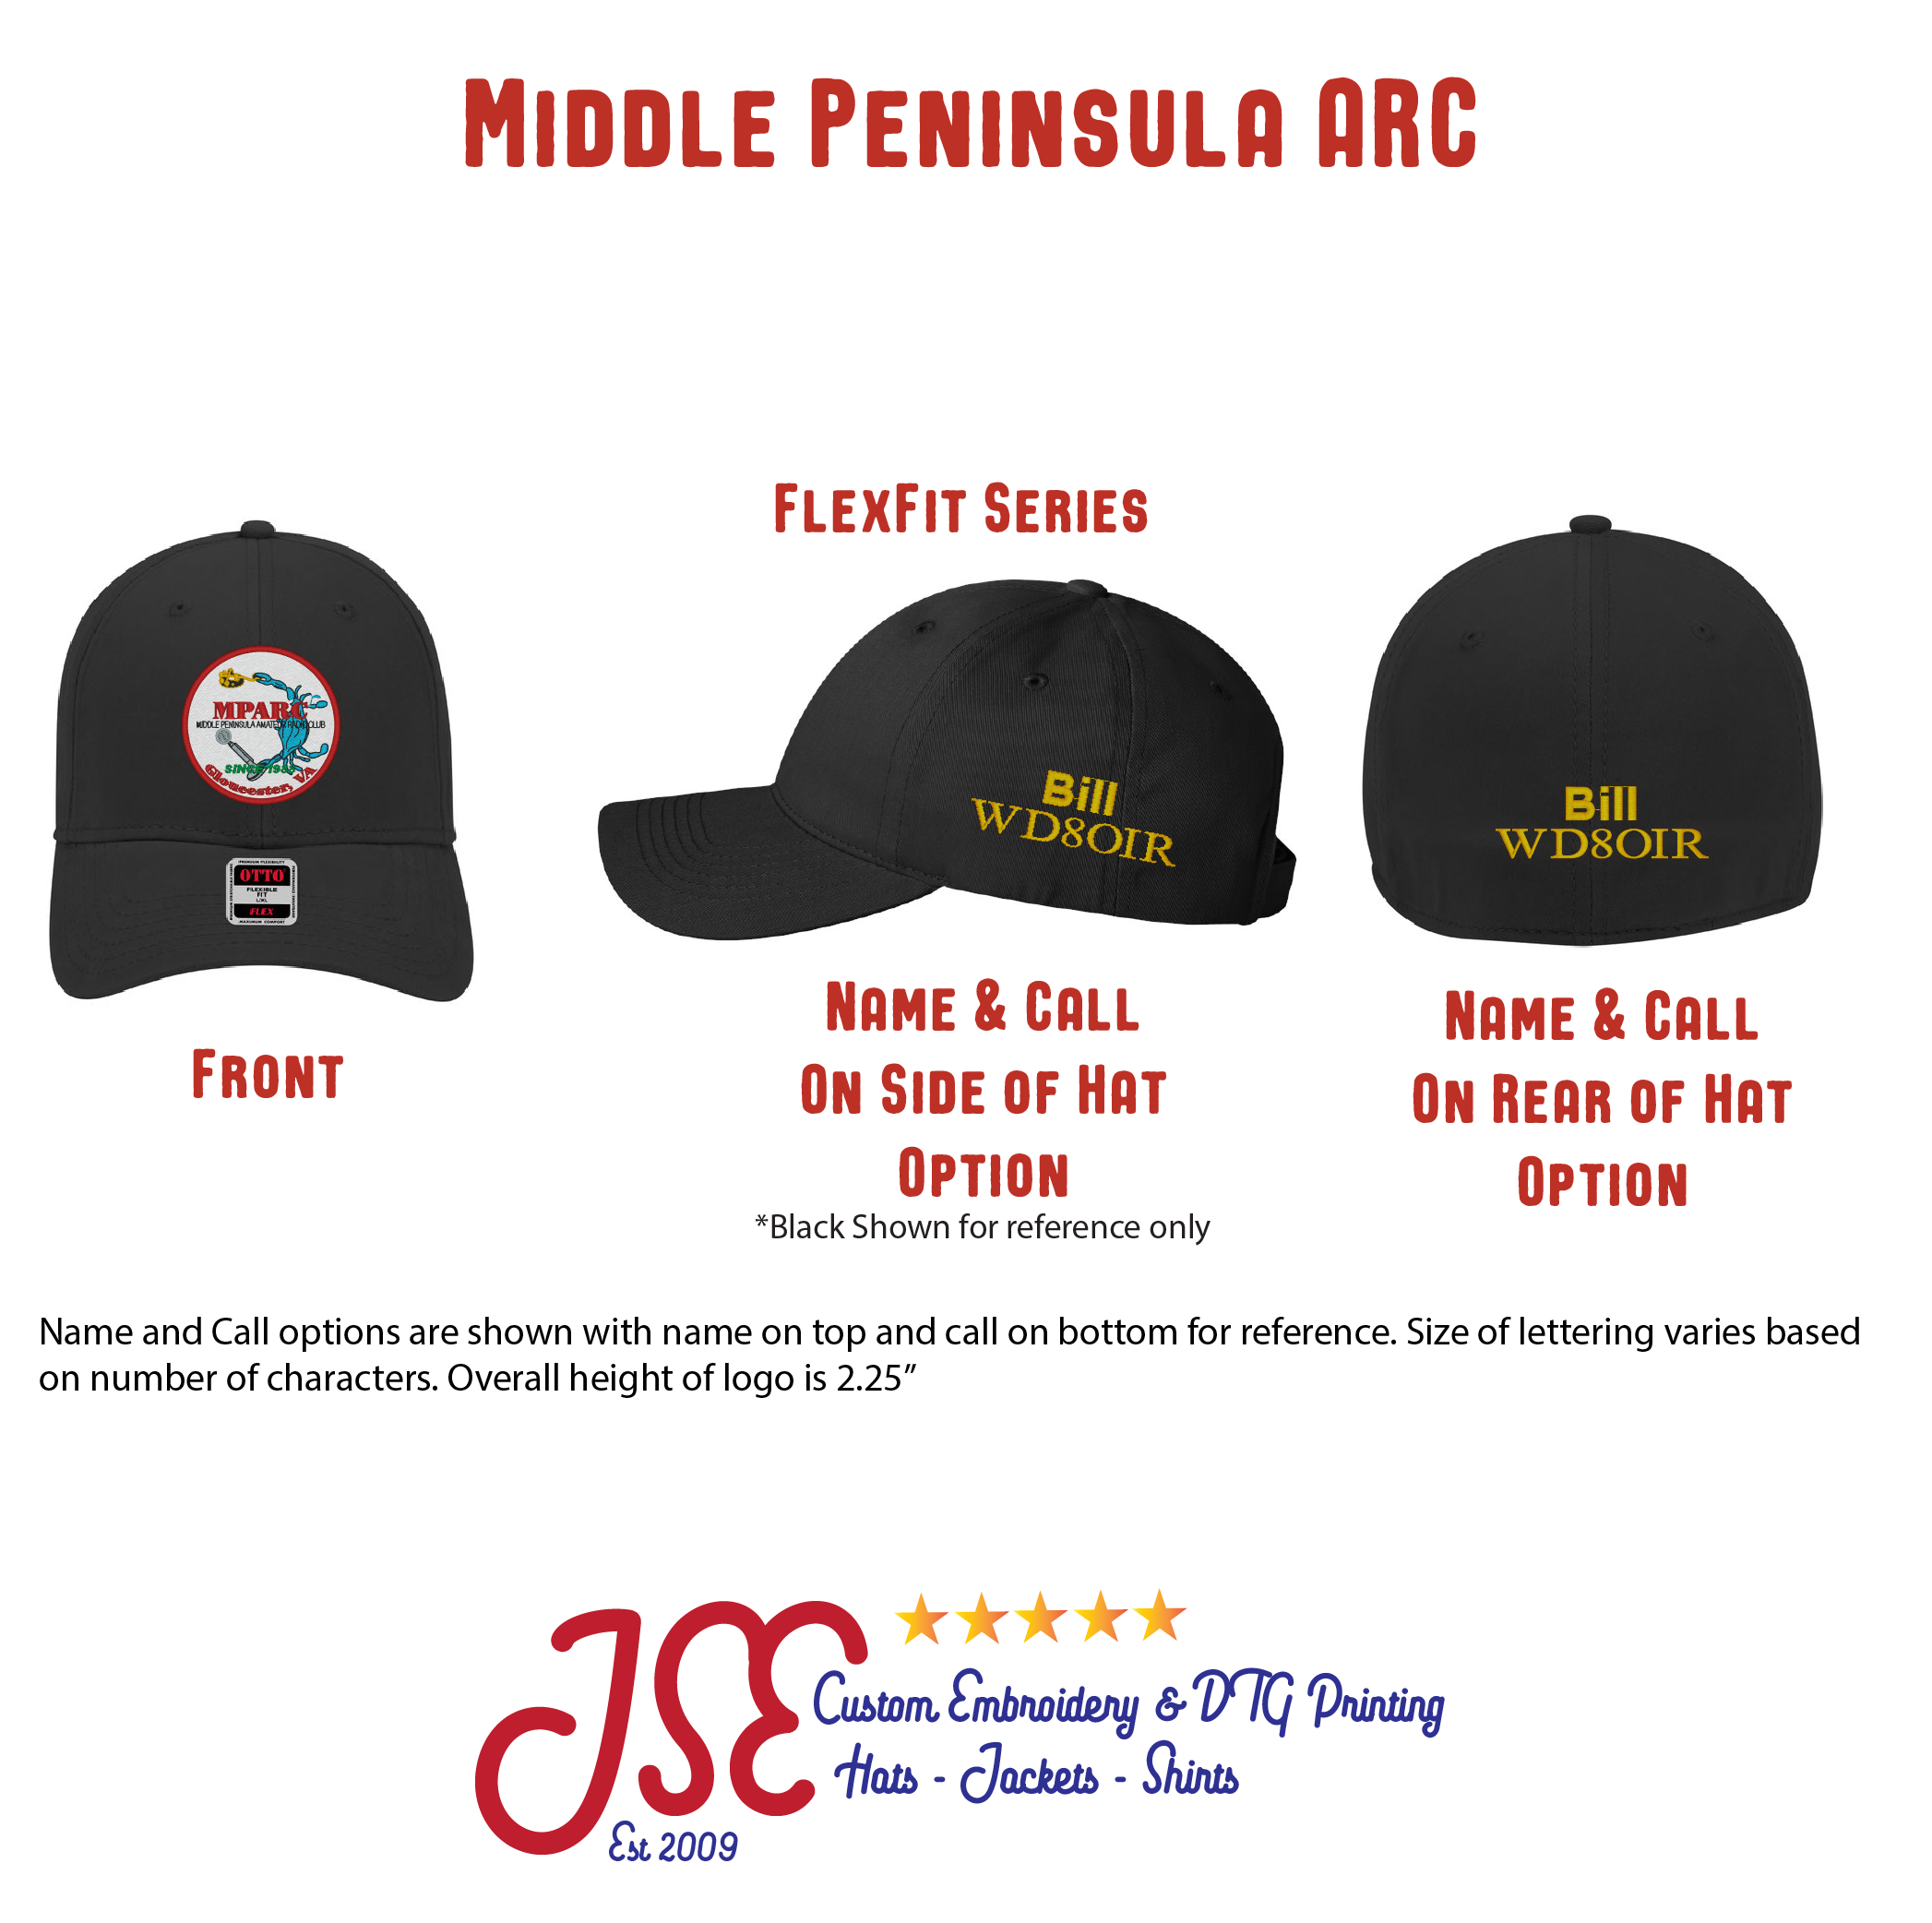 Middle Peninsula ARC Hat - JSE Embroidery